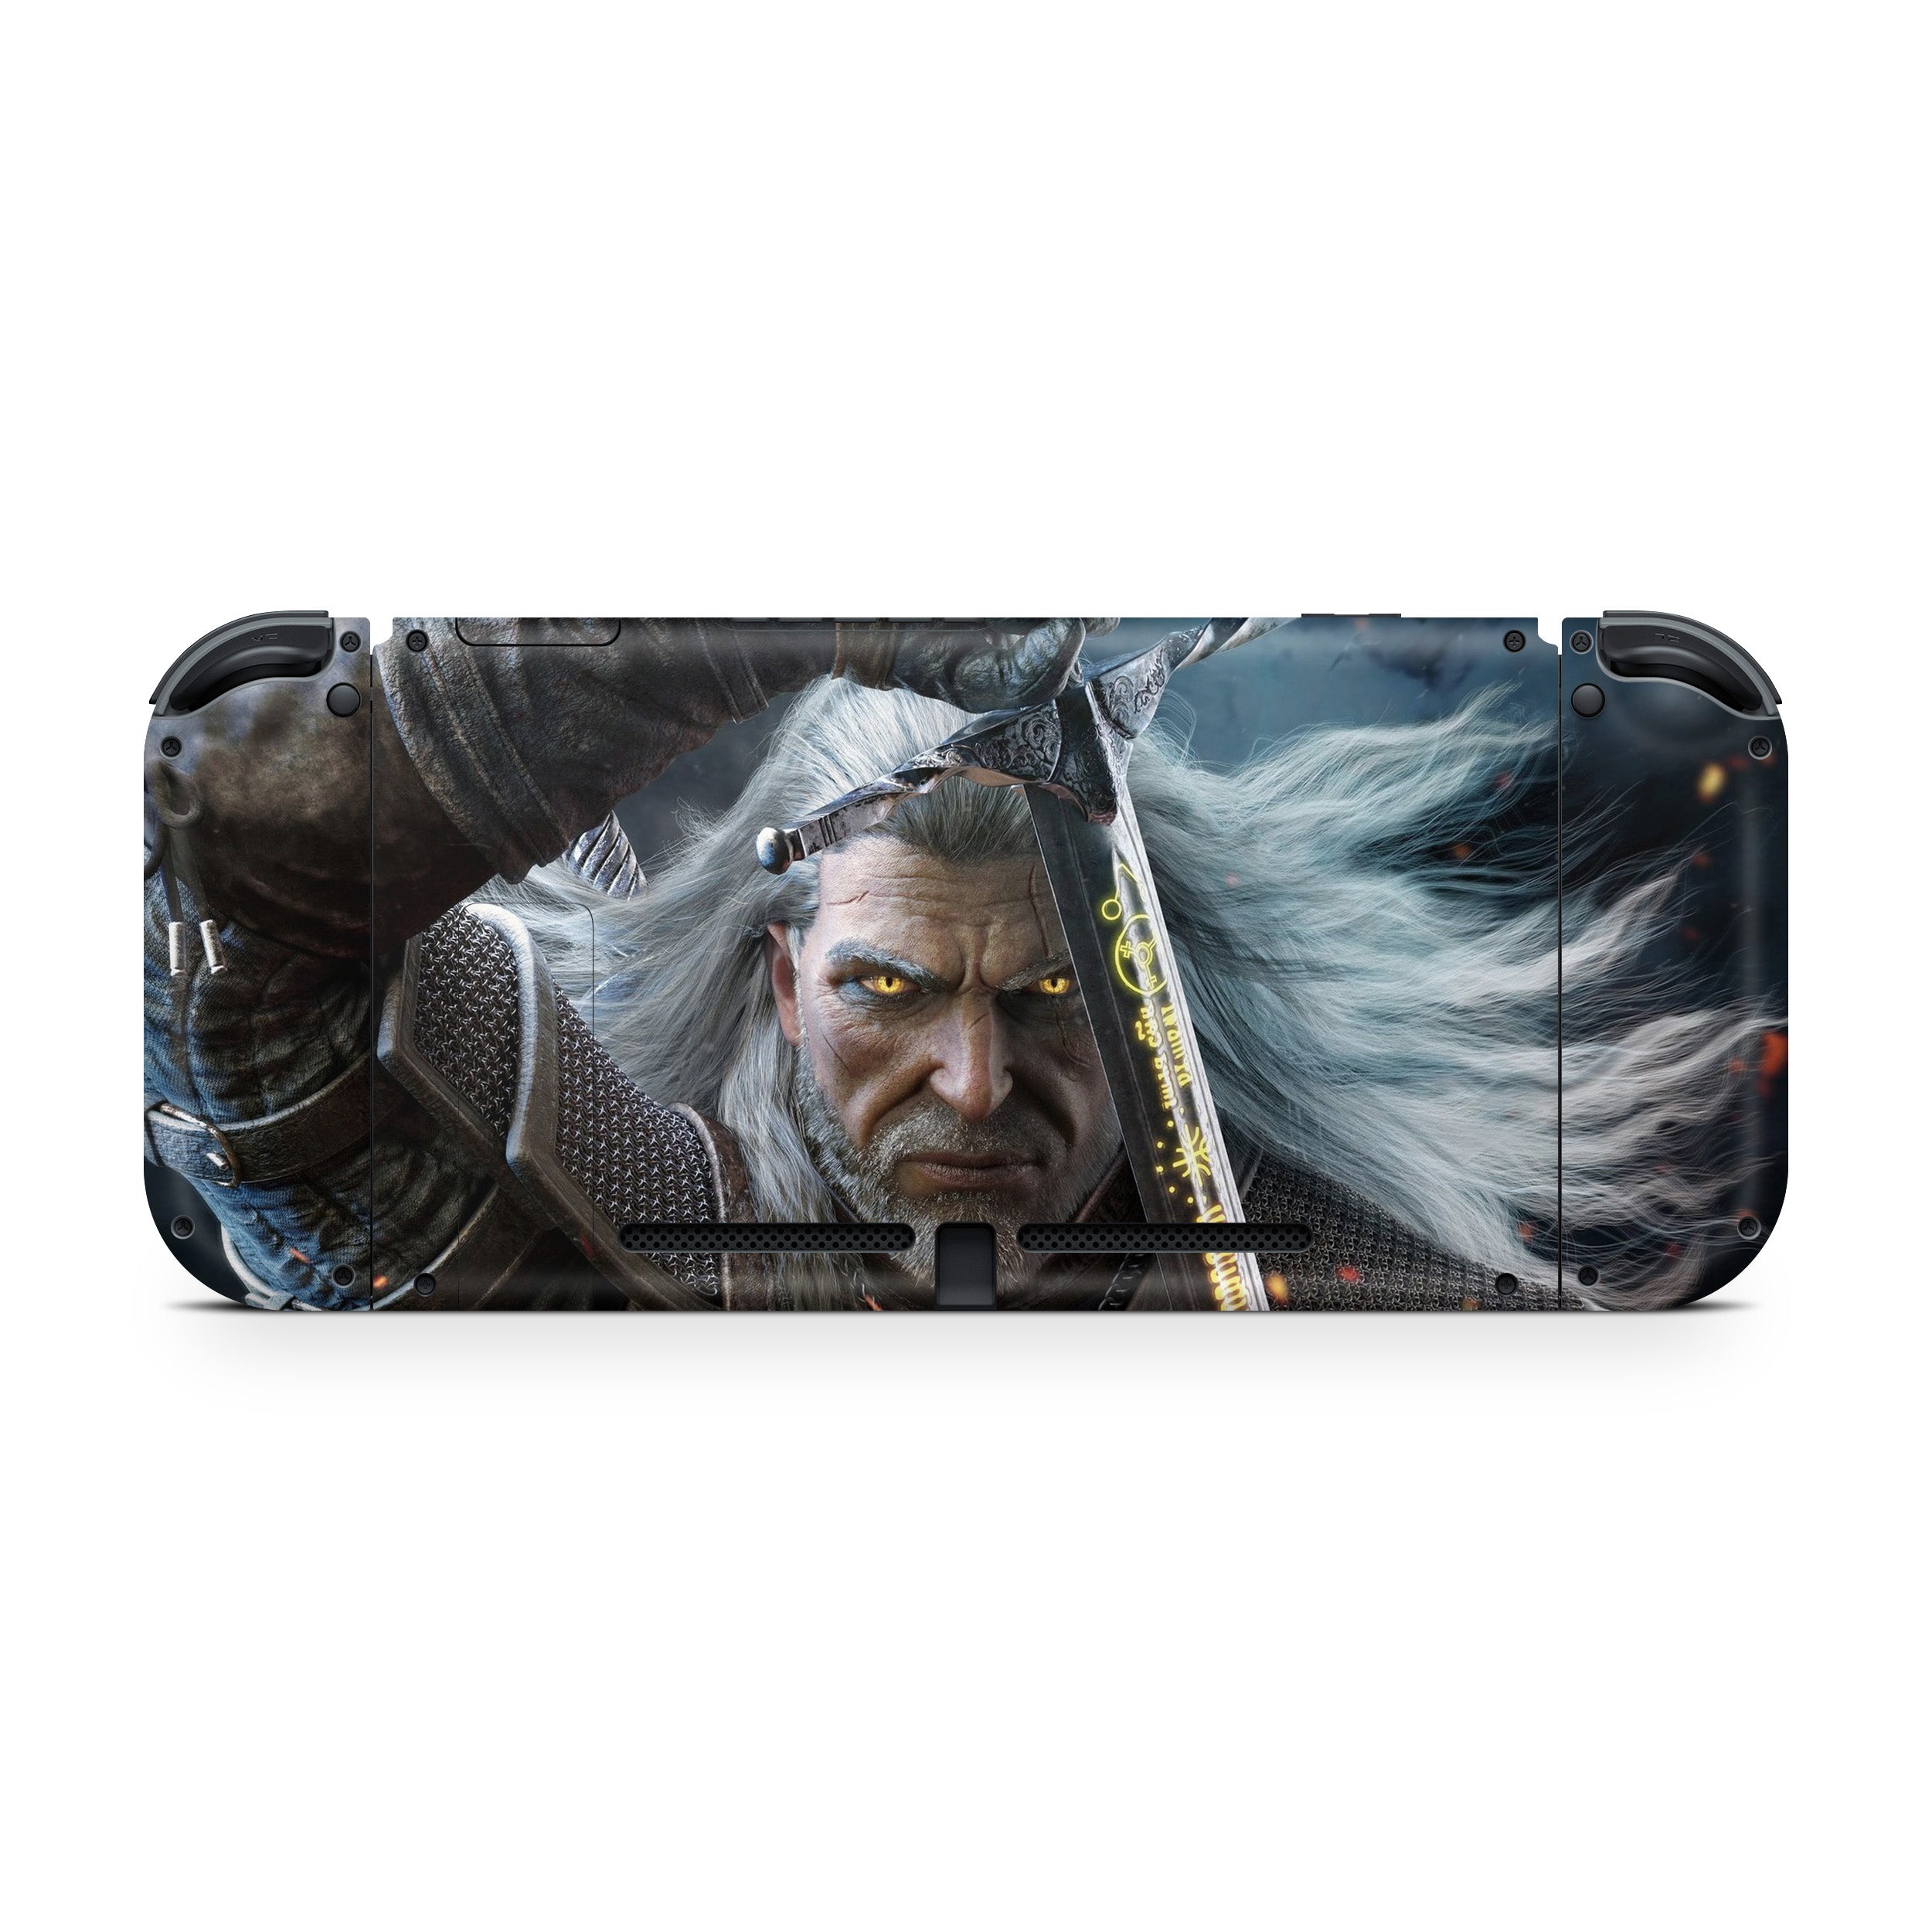 A video game skin featuring a The Witcher 3 design for the Nintendo Switch.